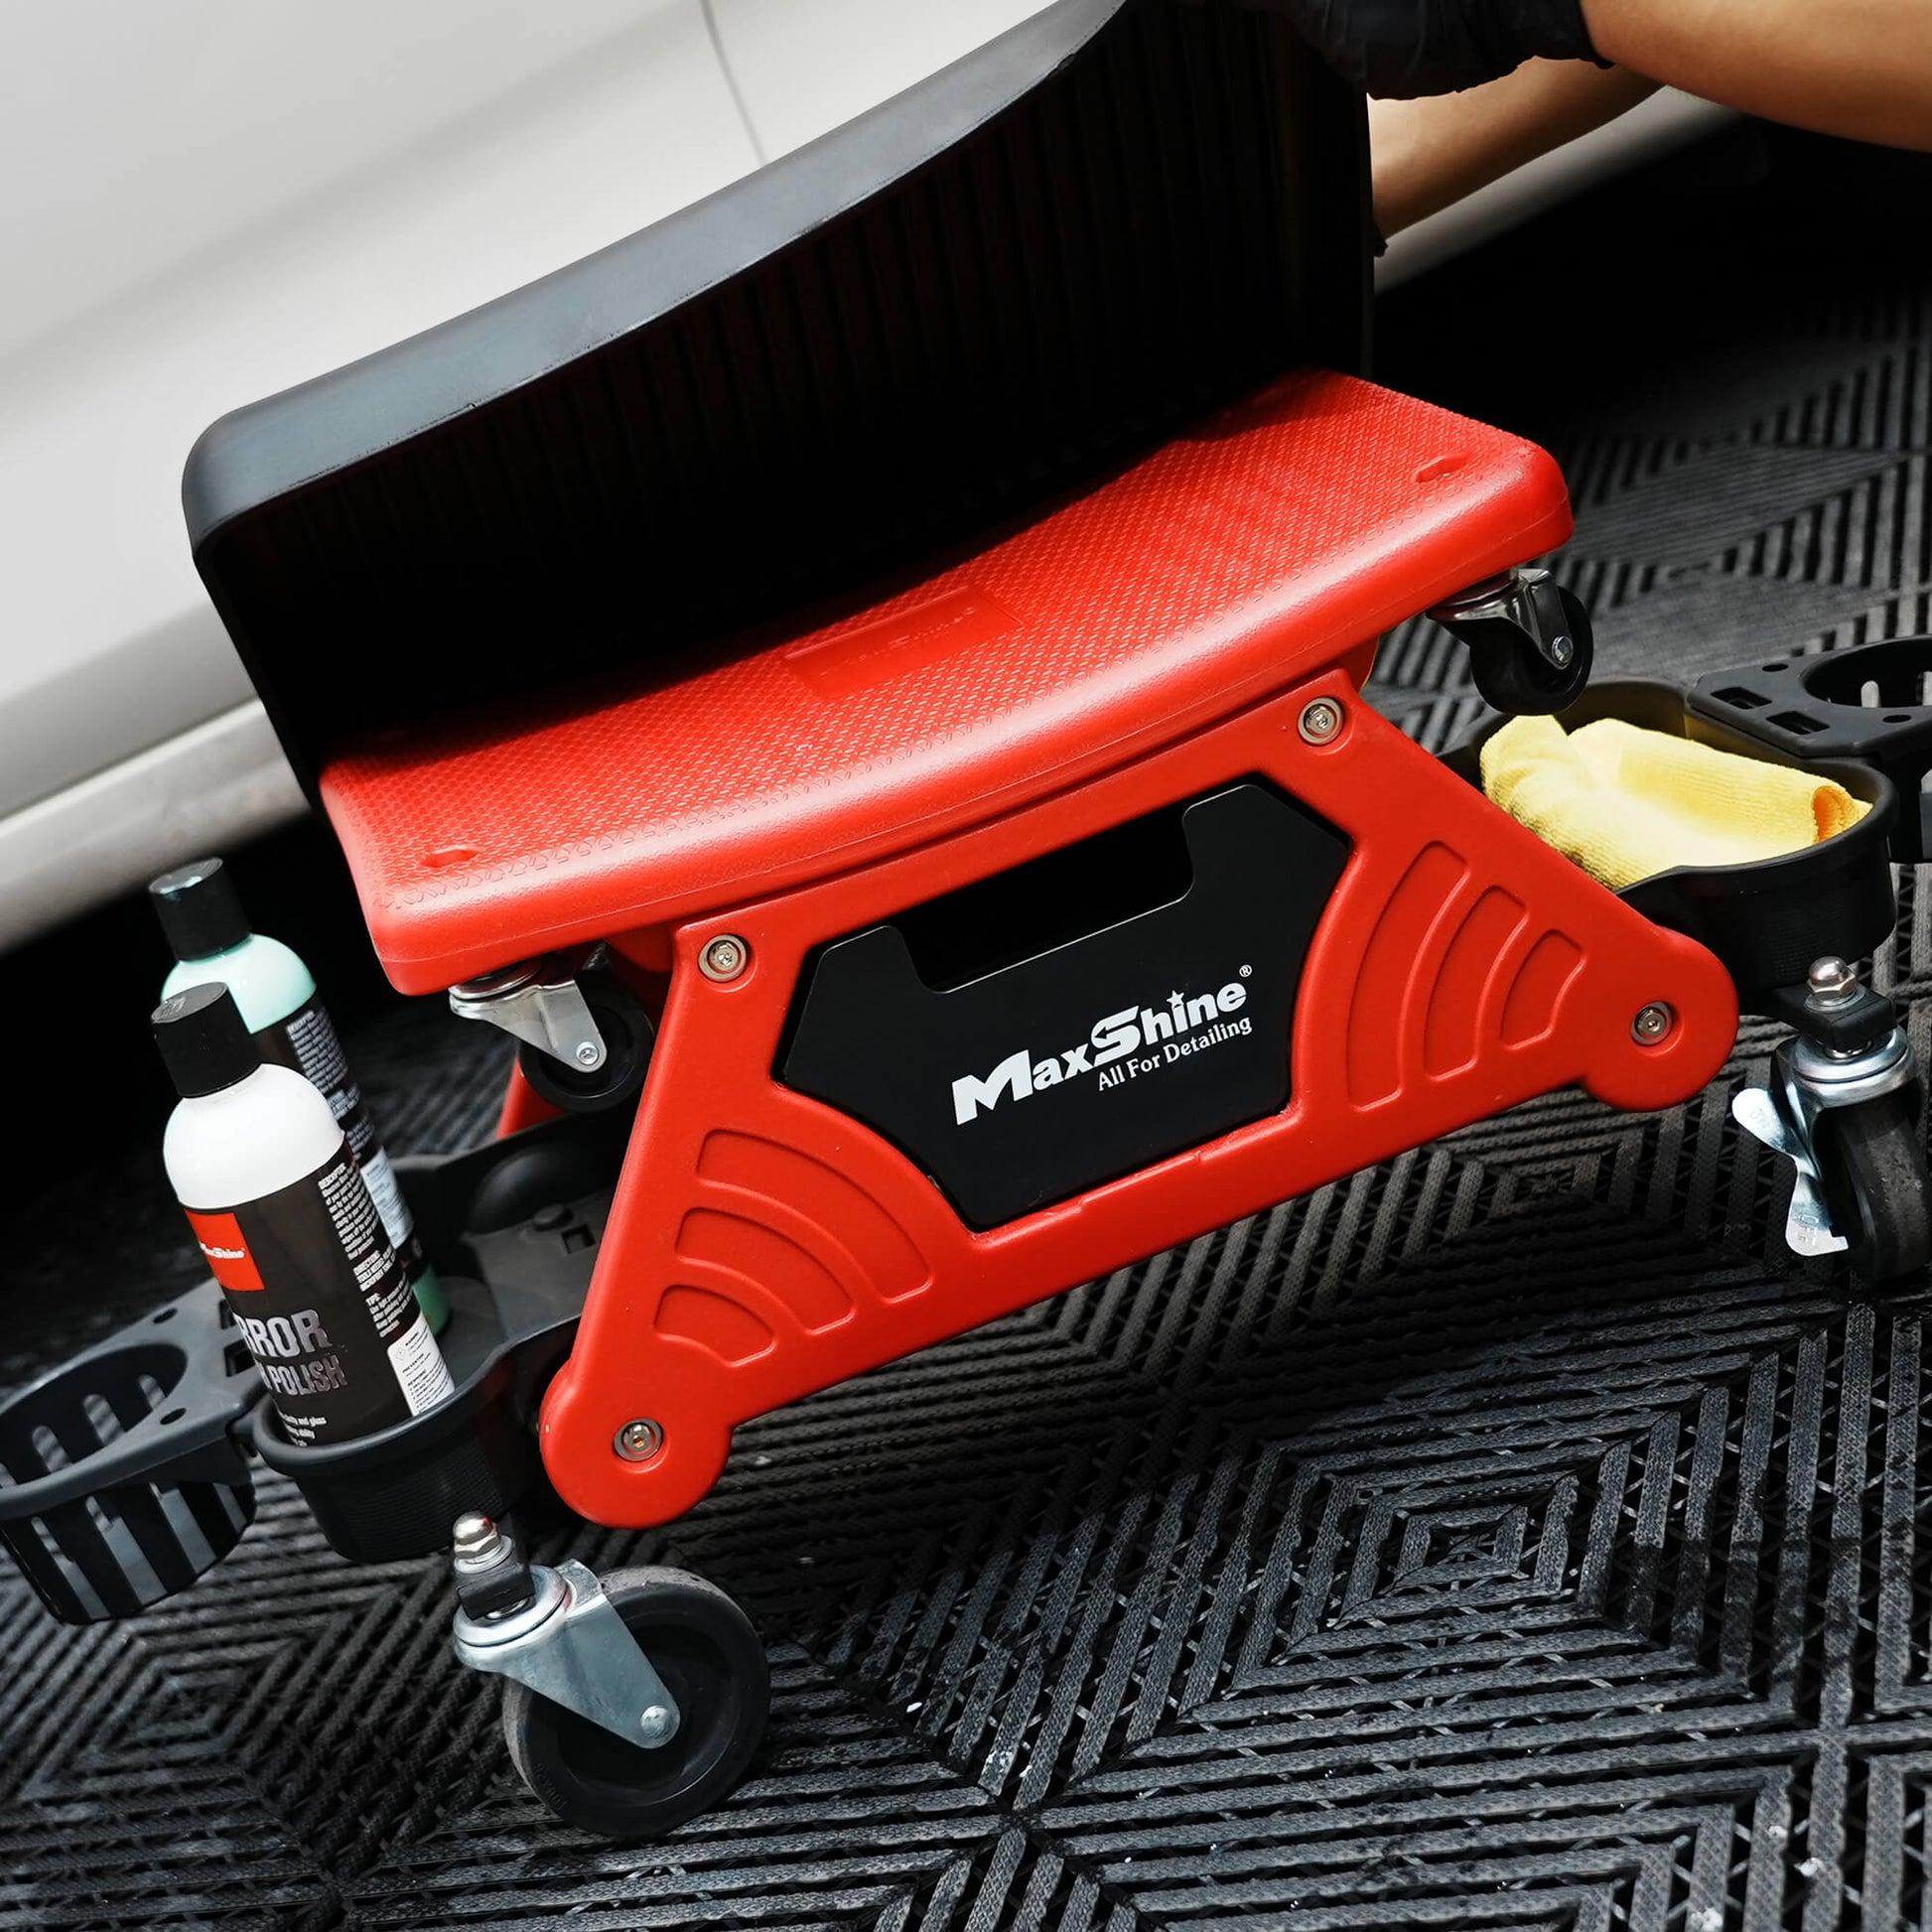 MaxShine Rolling Bucket Dolly (RED) W/Holders